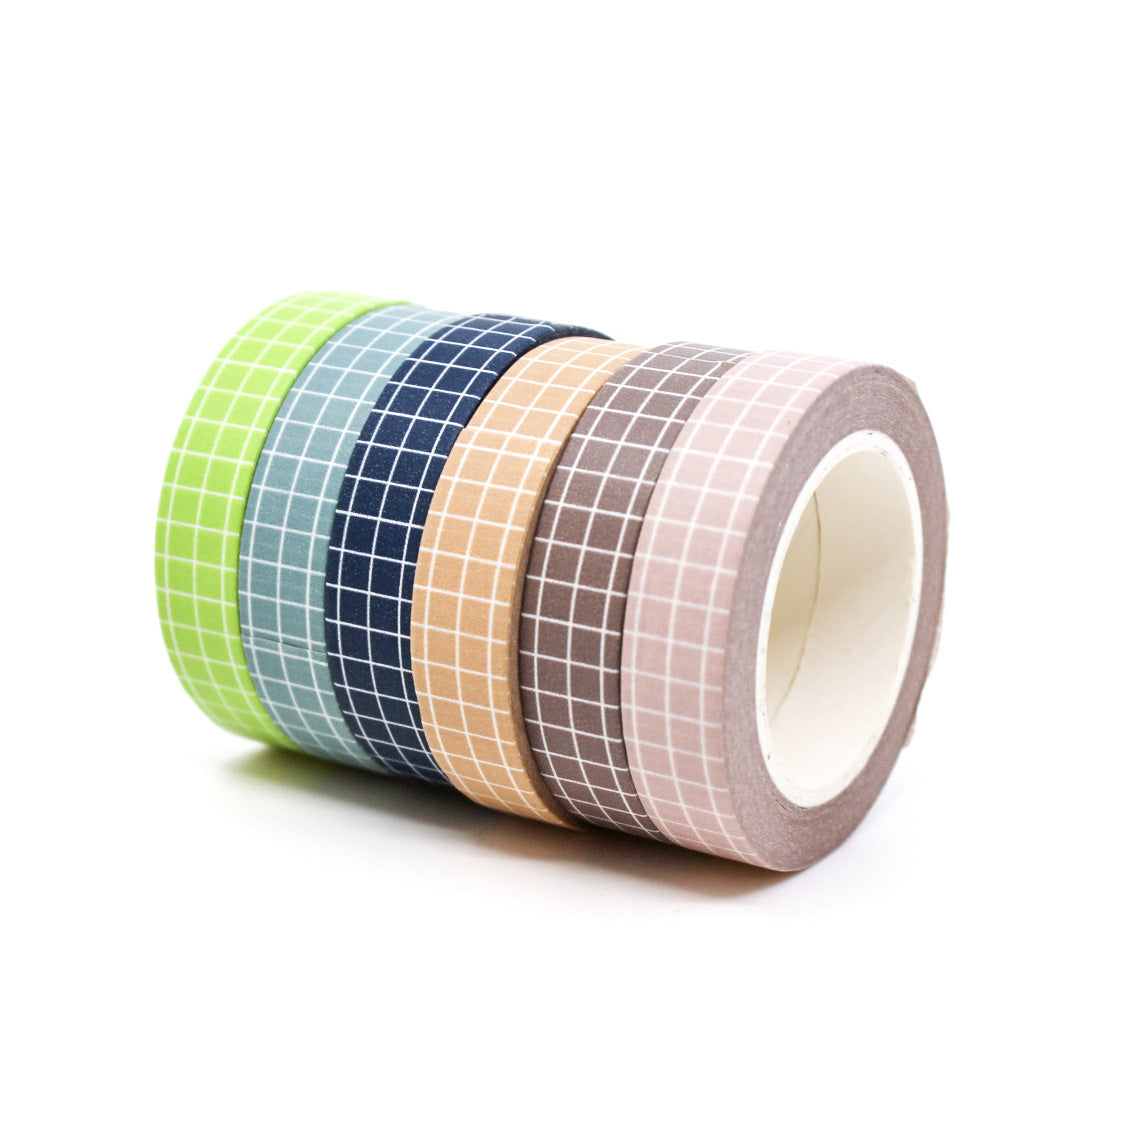 These colorful narrow grid tapes are functional and decorative, making them a must have for any planner, journal or calendar. These tapes come in Navy  Blue, Blue, Pink, Green, Brown, and peachy Tan and are sold at BBB Supplies Craft Shop.